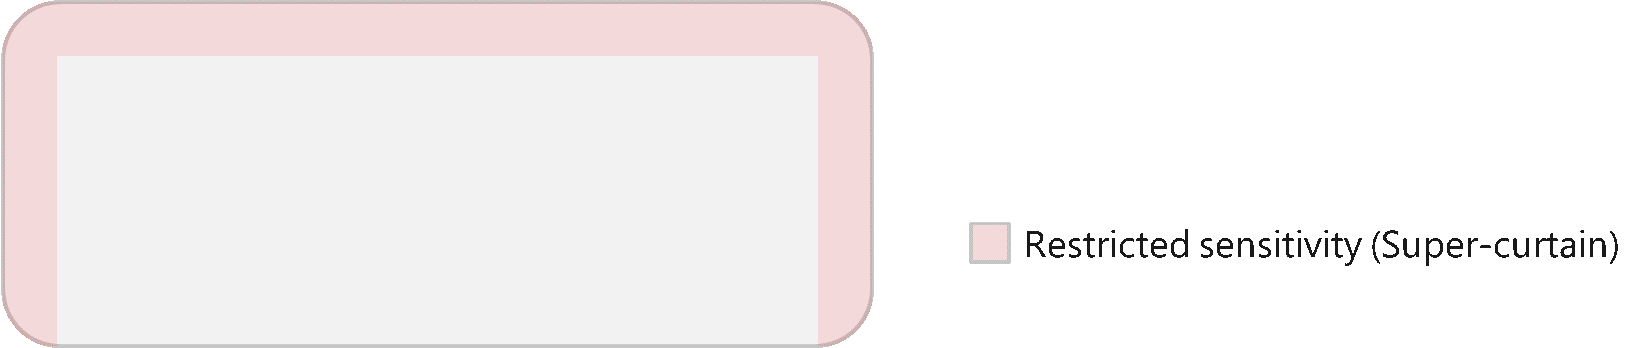 An image showing the restricted sensitivity zone on a touchpad